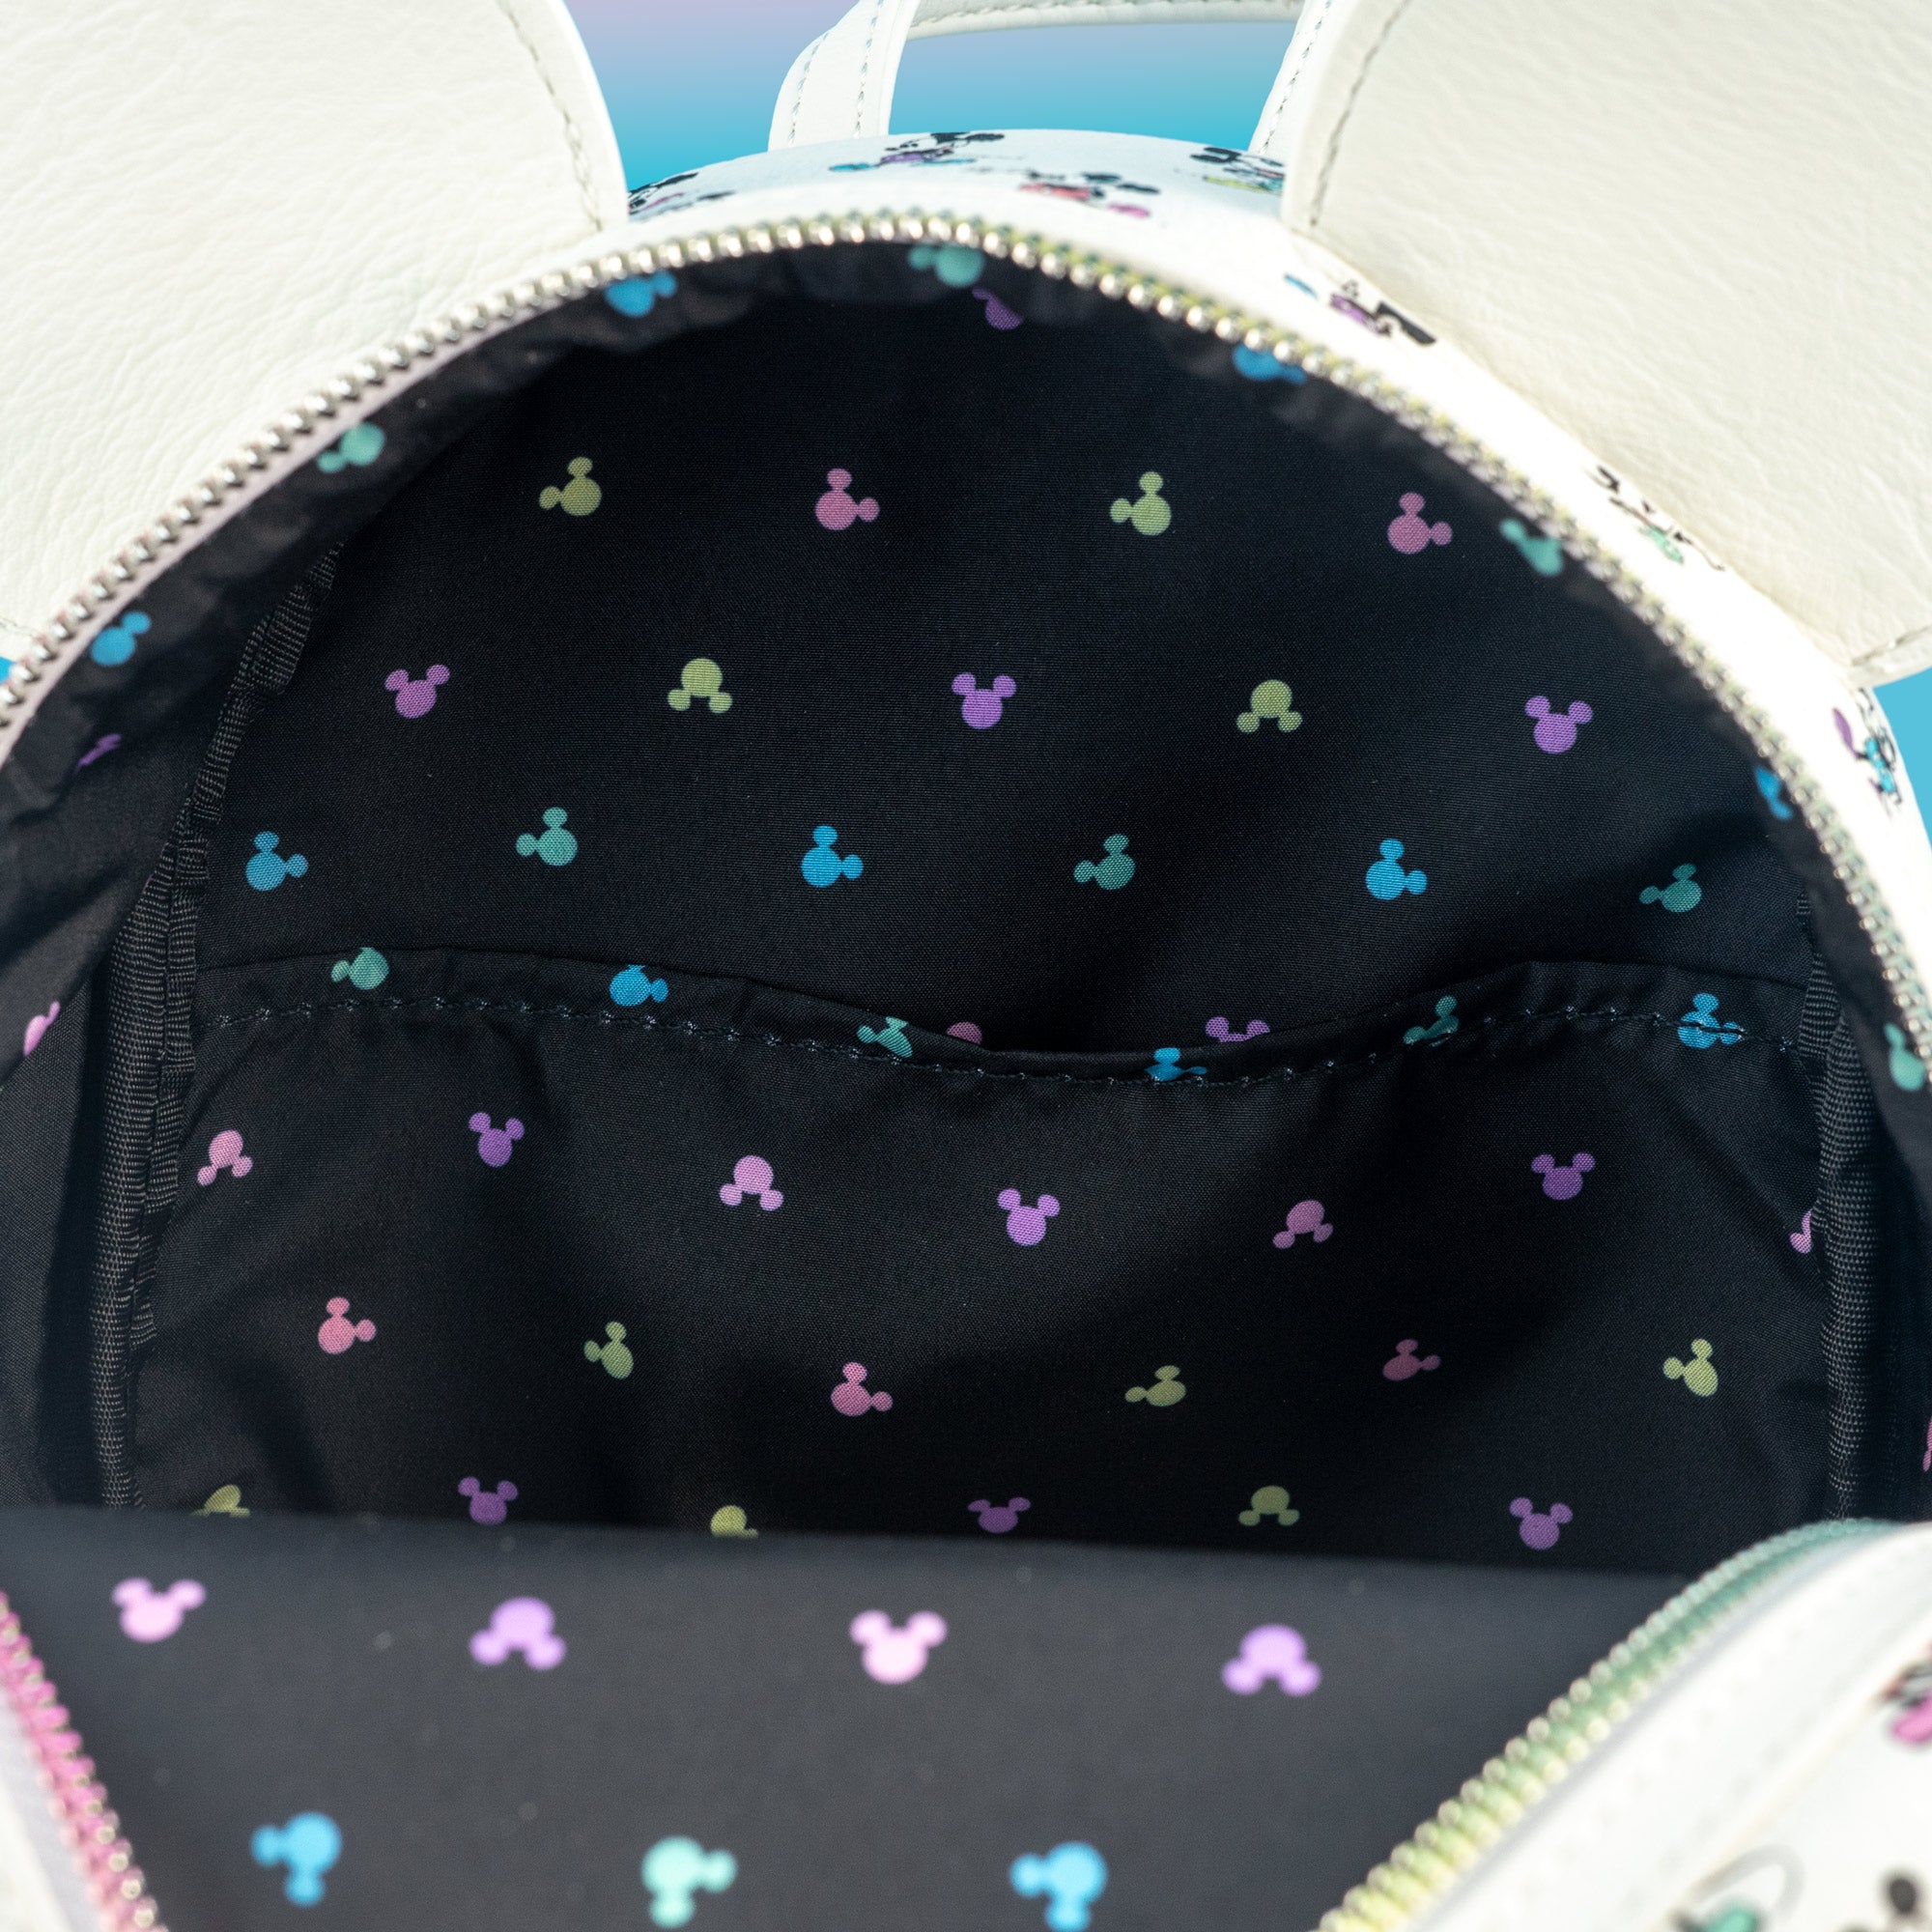 Loungefly x Disney Mickey Mouse Pastel Rainbow Poses Mini Backpack